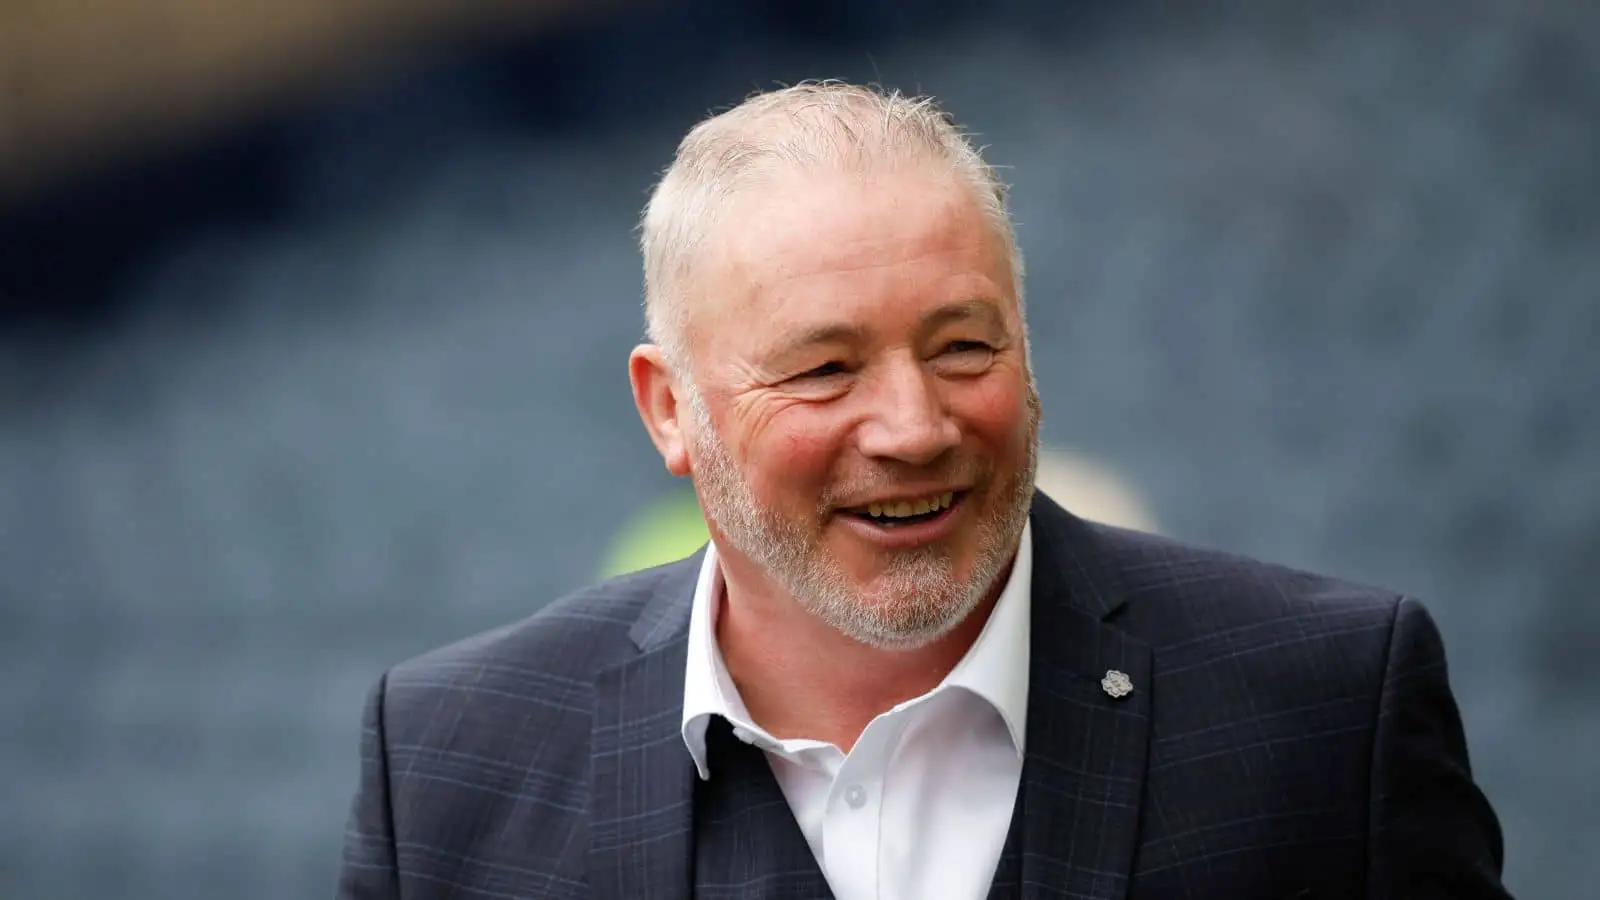 Ally McCoist TV pundit at the Scottish FA Cup Final, Rangers versus Heart of Midlothian